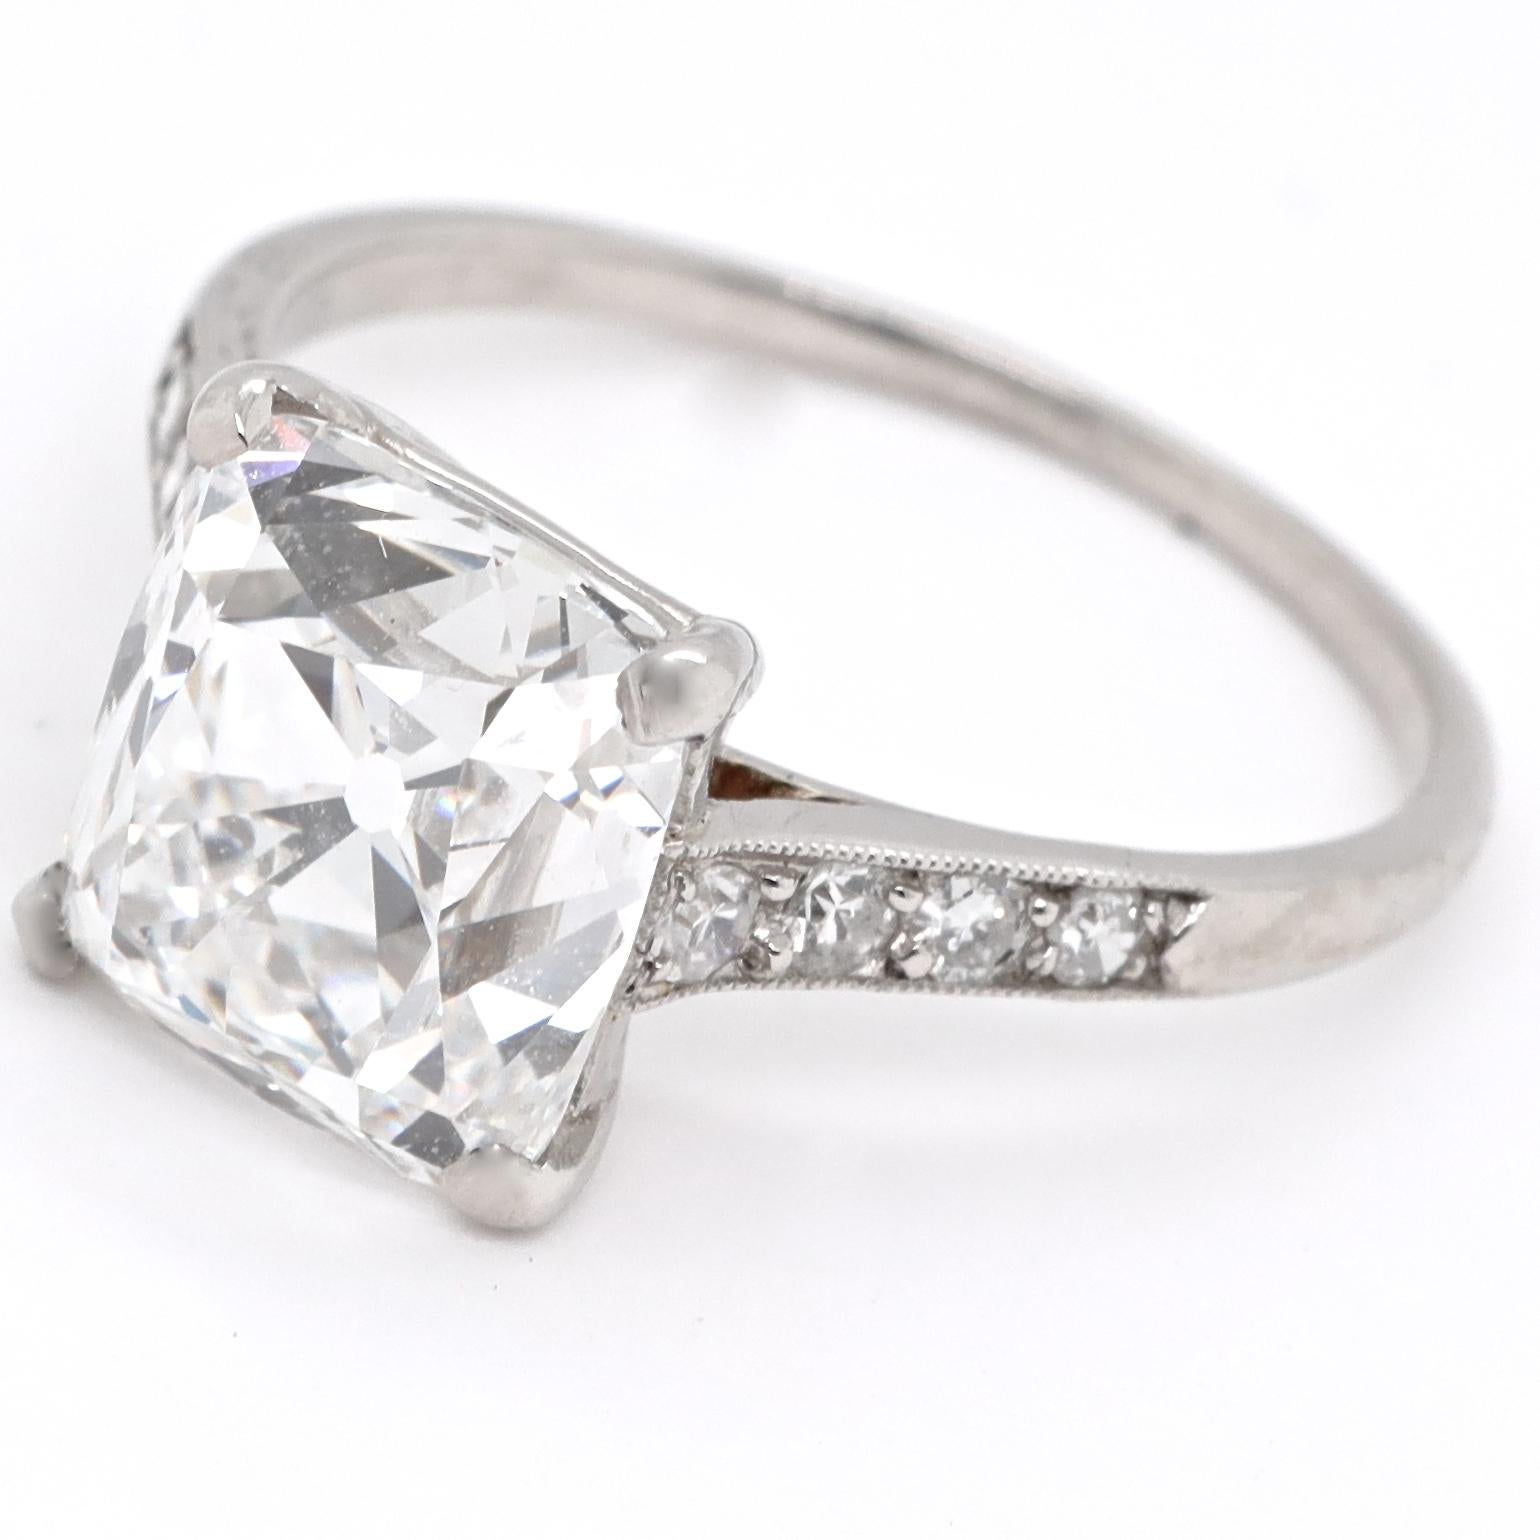 The benefit of buying a signed ring is the outstanding diamond quality and craftsmanship, especially art deco from Cartier. Rest assured it's extremely rare and desirable. GIA certified as 4.02 carat old mine cut diamond, E color VVS2 clarity.